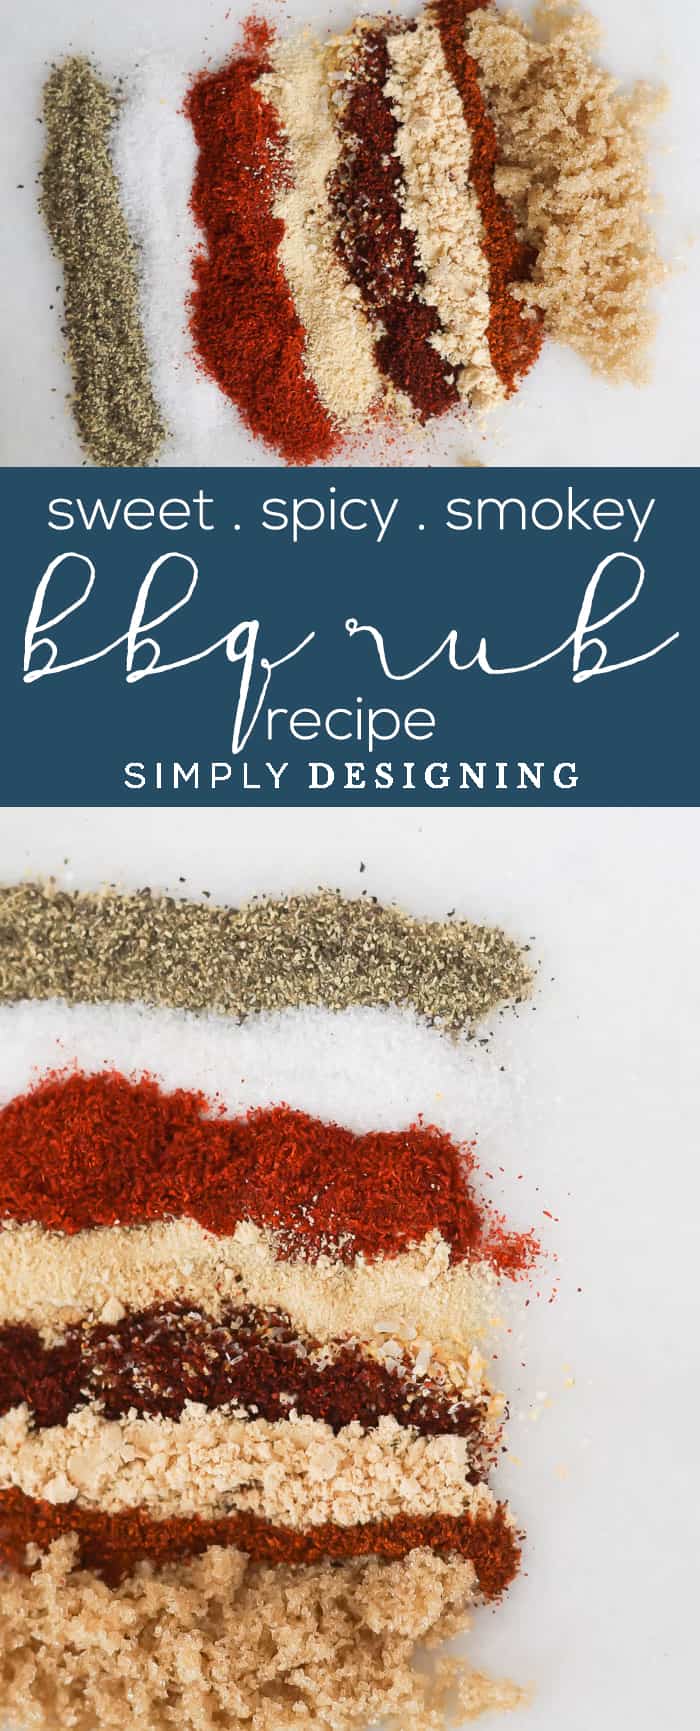 The BEST Sweet Spicy and Smokey BBQ Rub Recipe - an easy to make BBQ Rub recipe that will give your meat a delicious BBQ flavor